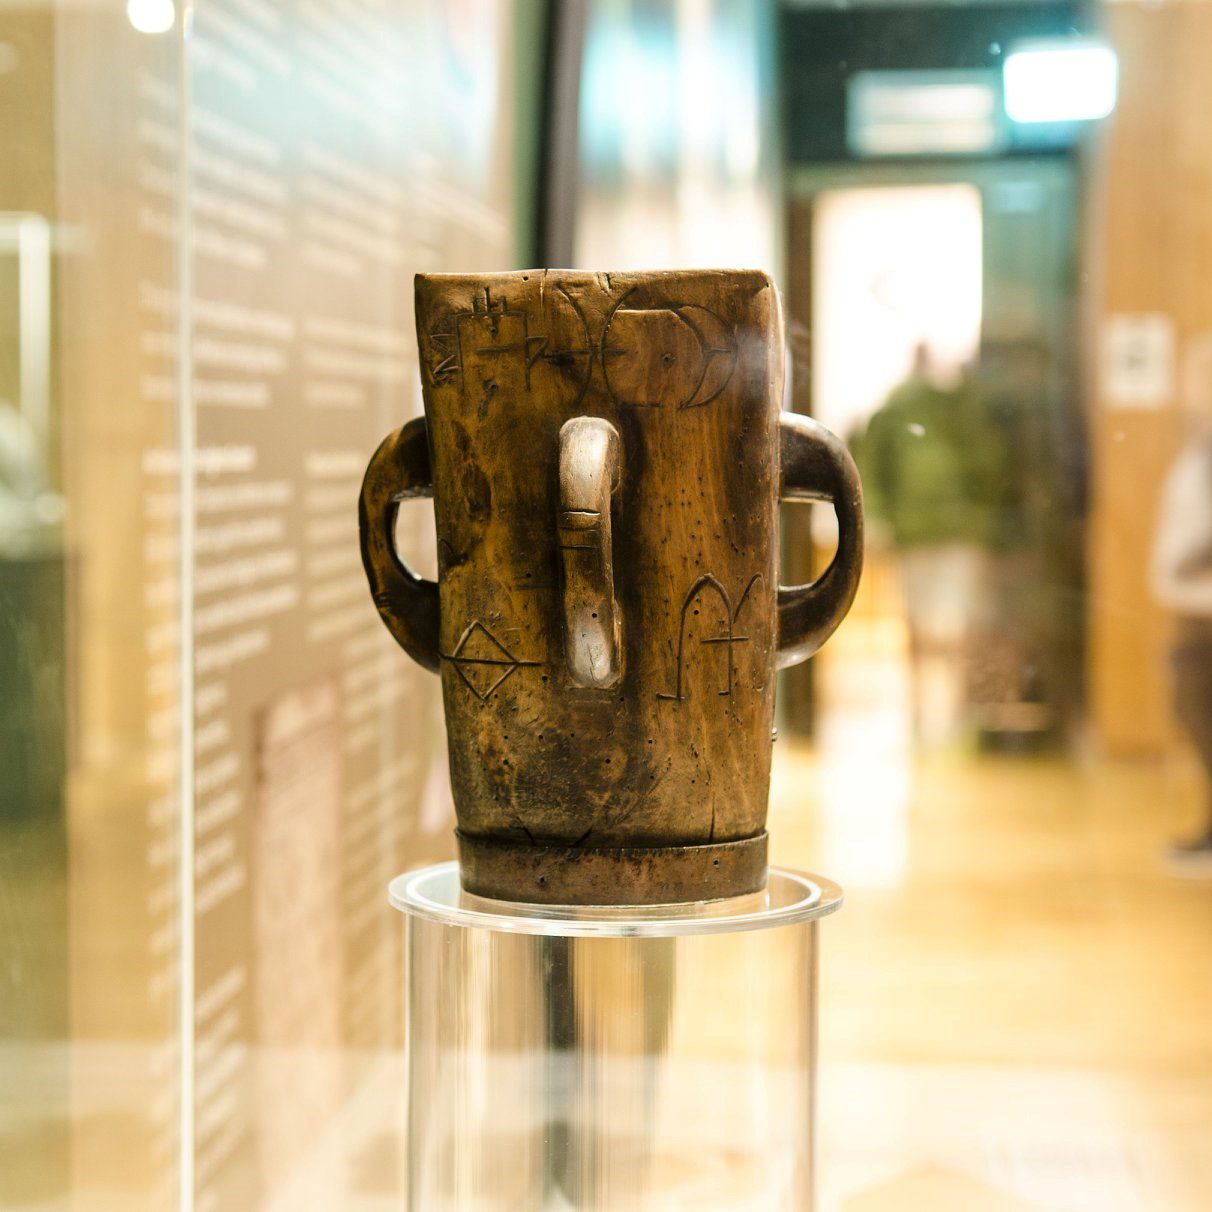 A photo of the Physician's Cup on display in the Gaelic Ireland exhibition.